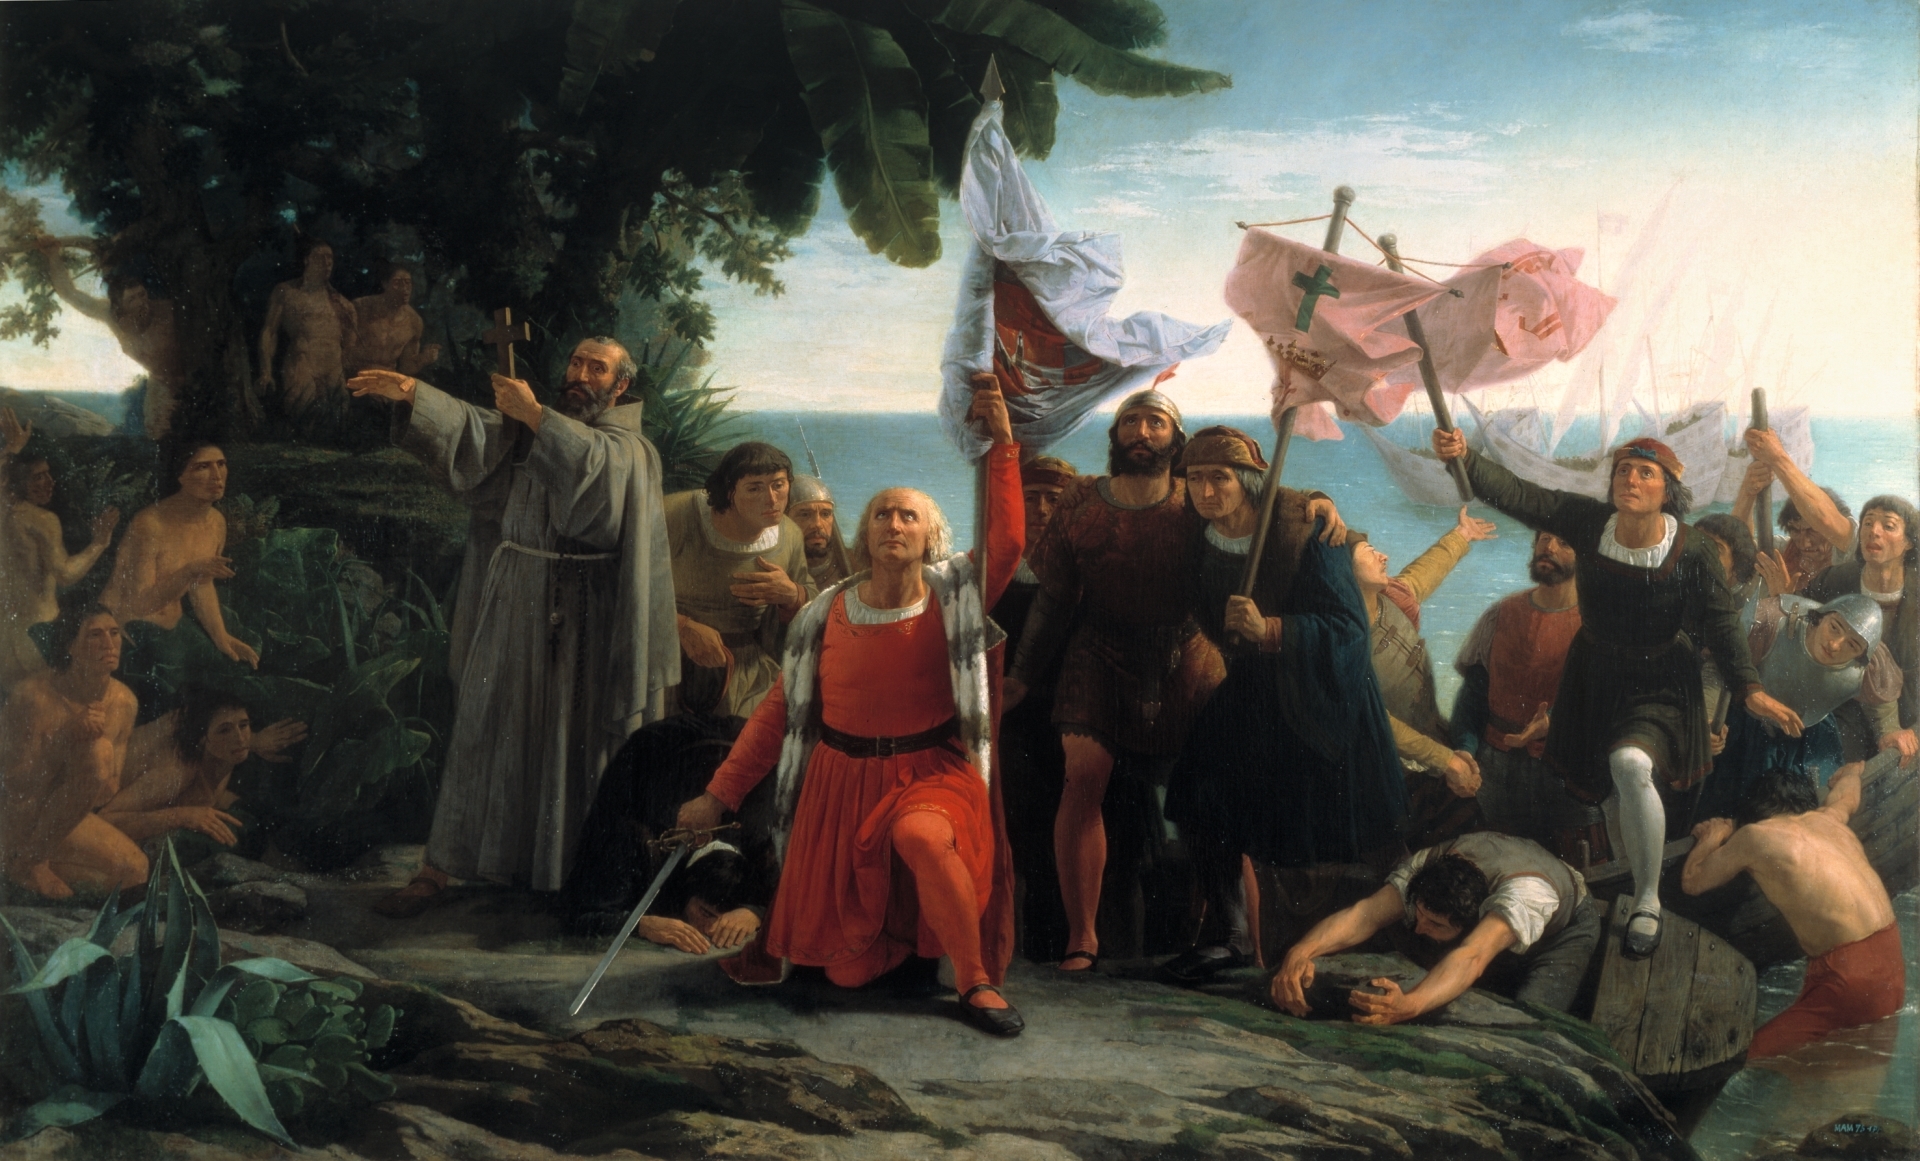 Christopher Columbus' first landing in the Americas, by Dioscoro Puebla